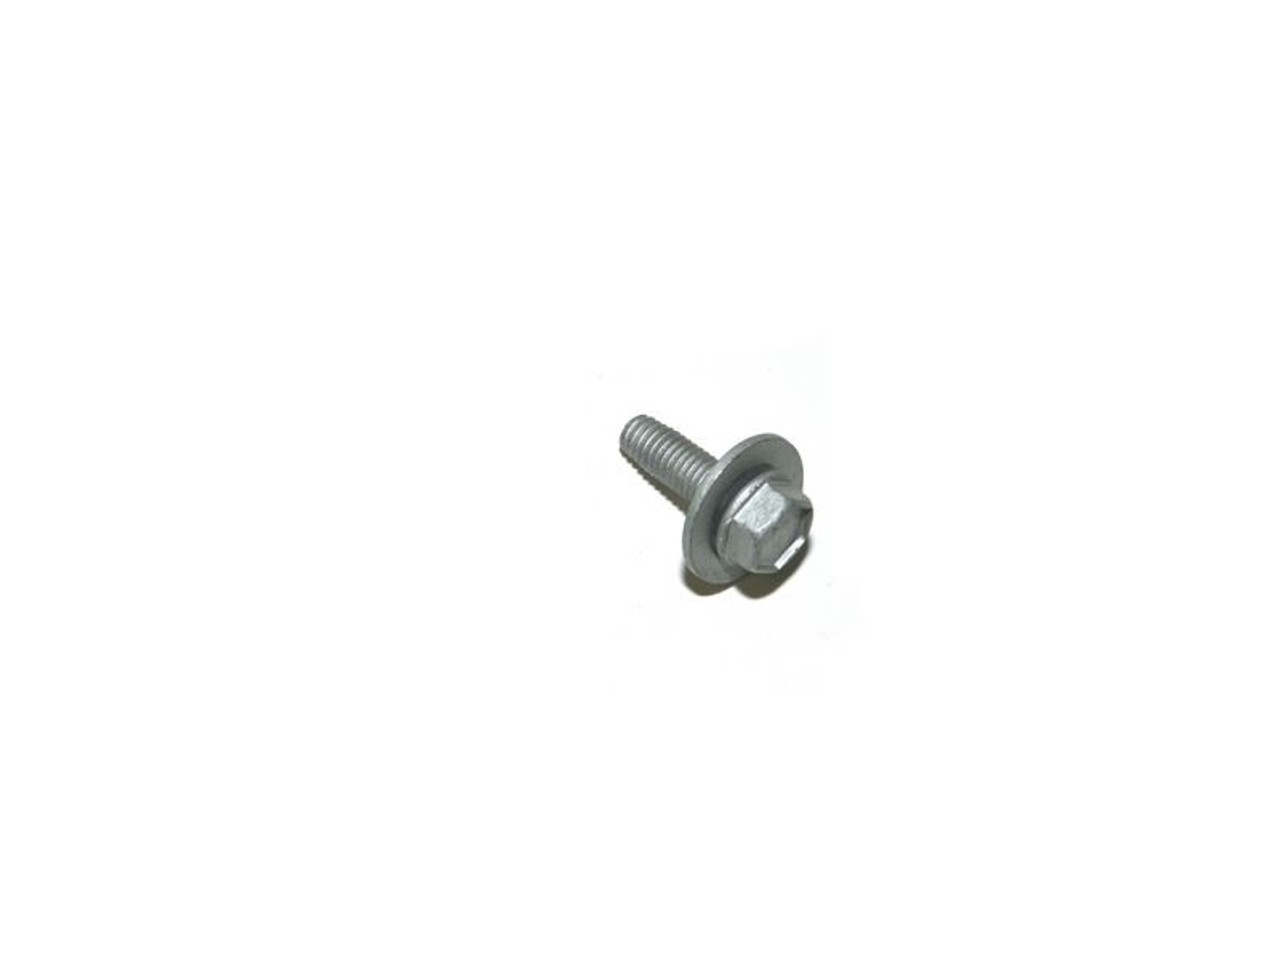 Genuine Discovery 3, Discovery 4 and Range Rover Sport Handbrake Cable Hook Bolt - PYP000221